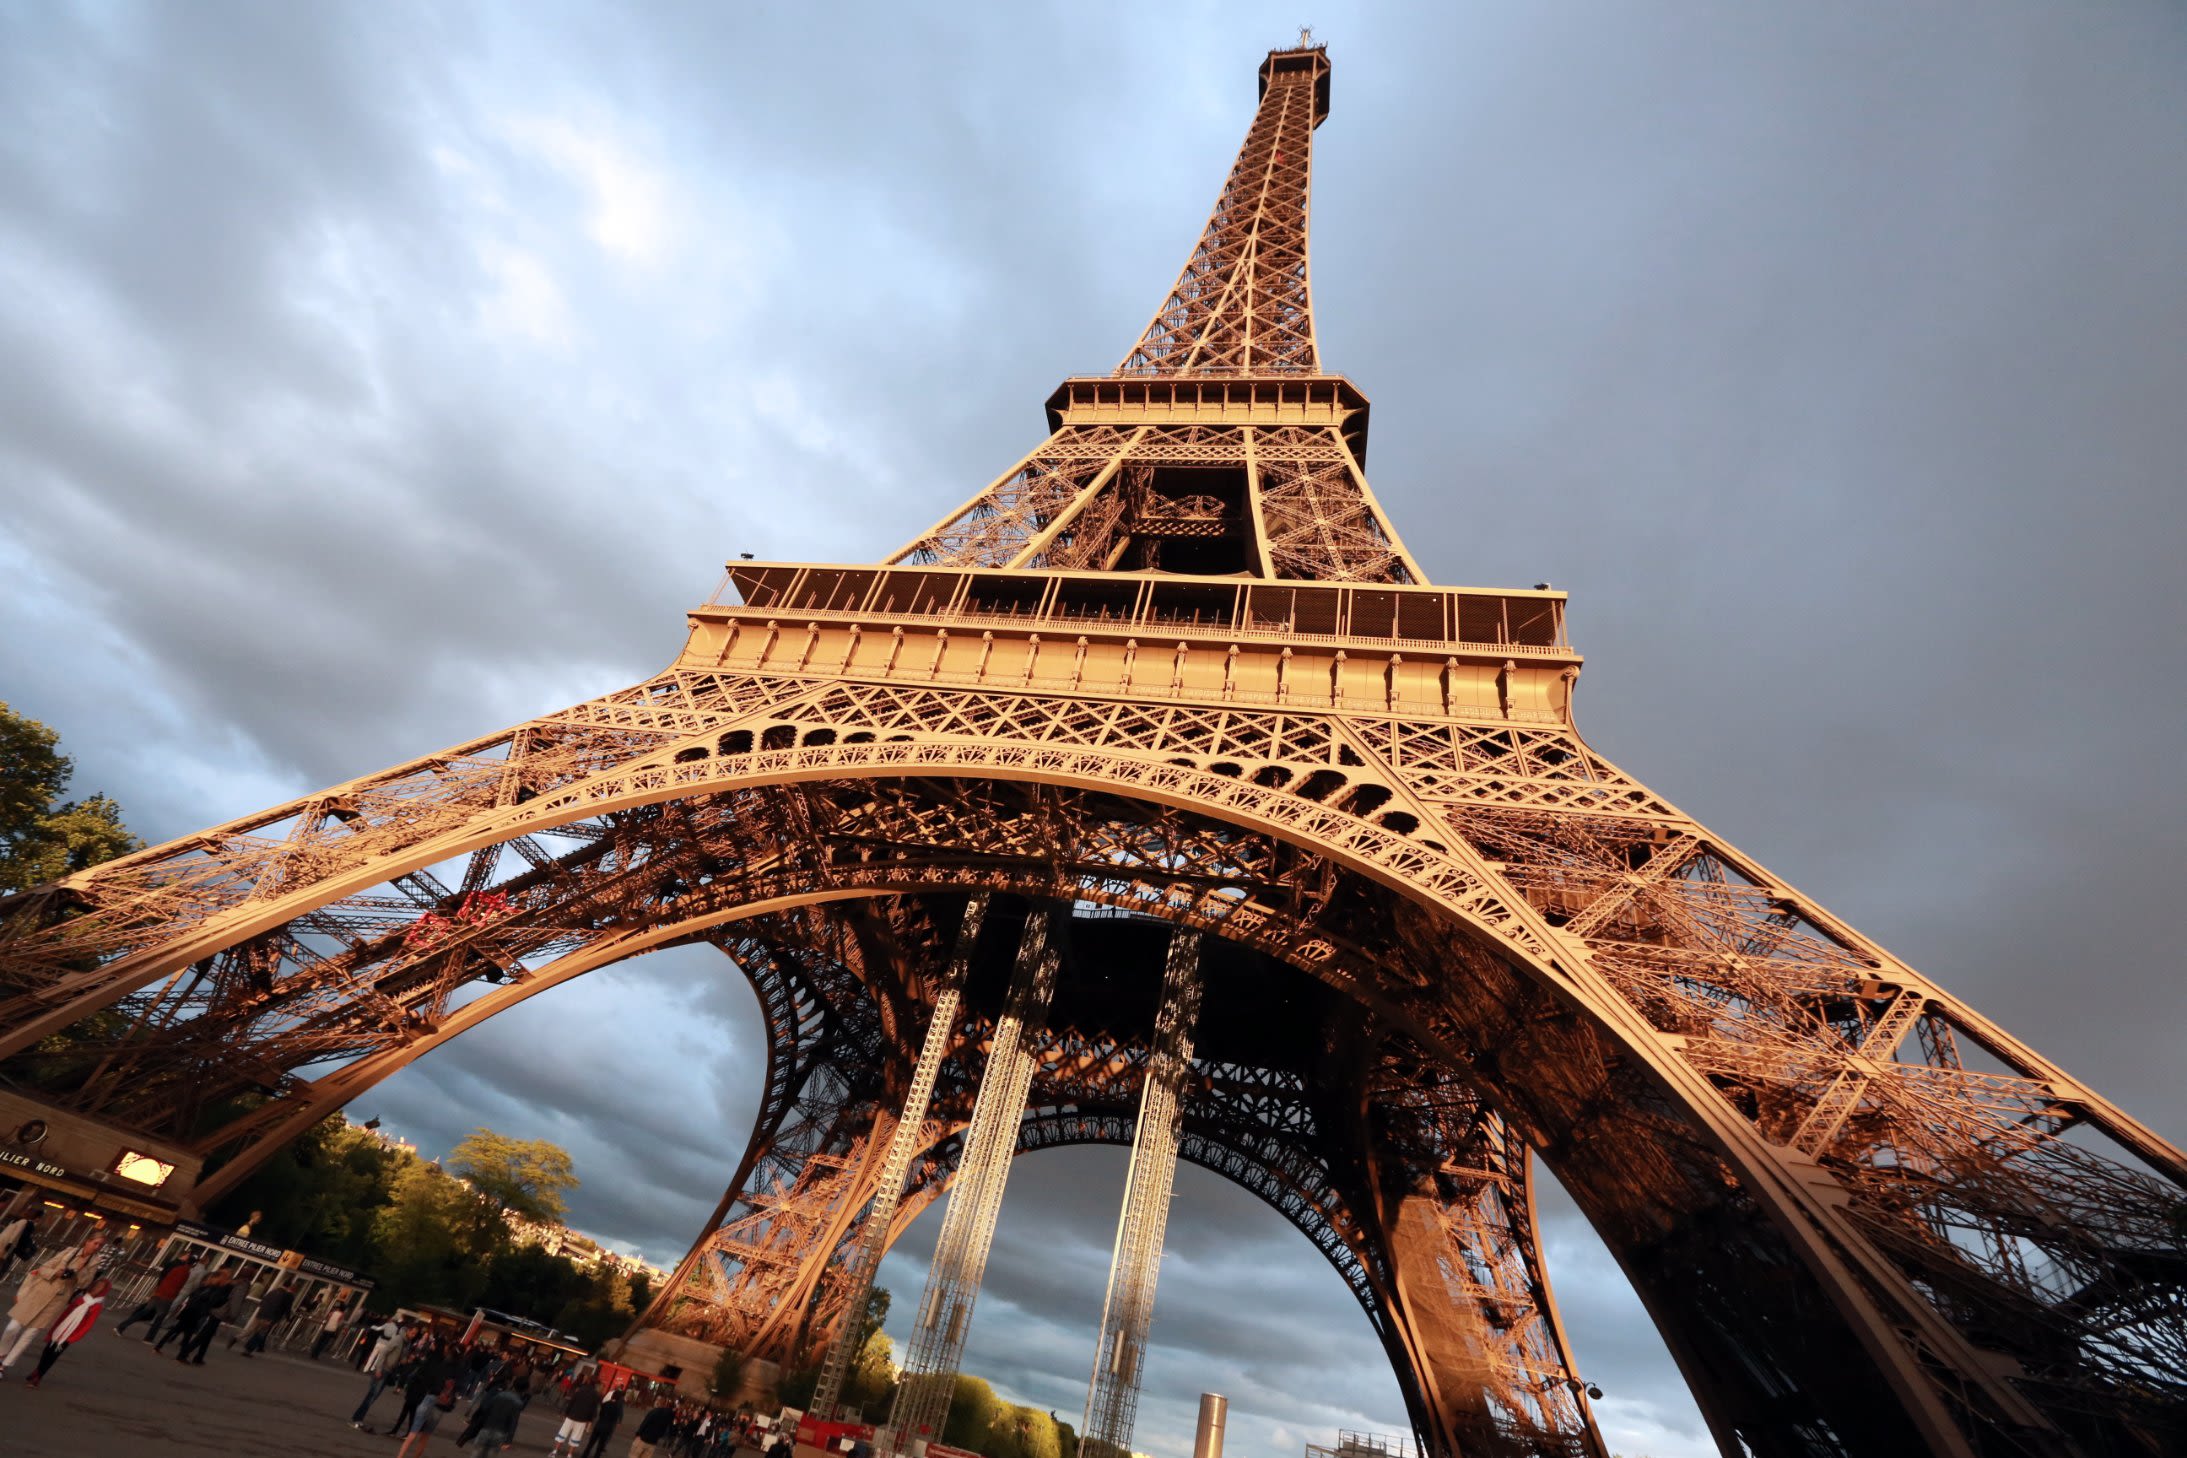 Eiffel Tower guide: What you need to know before you go